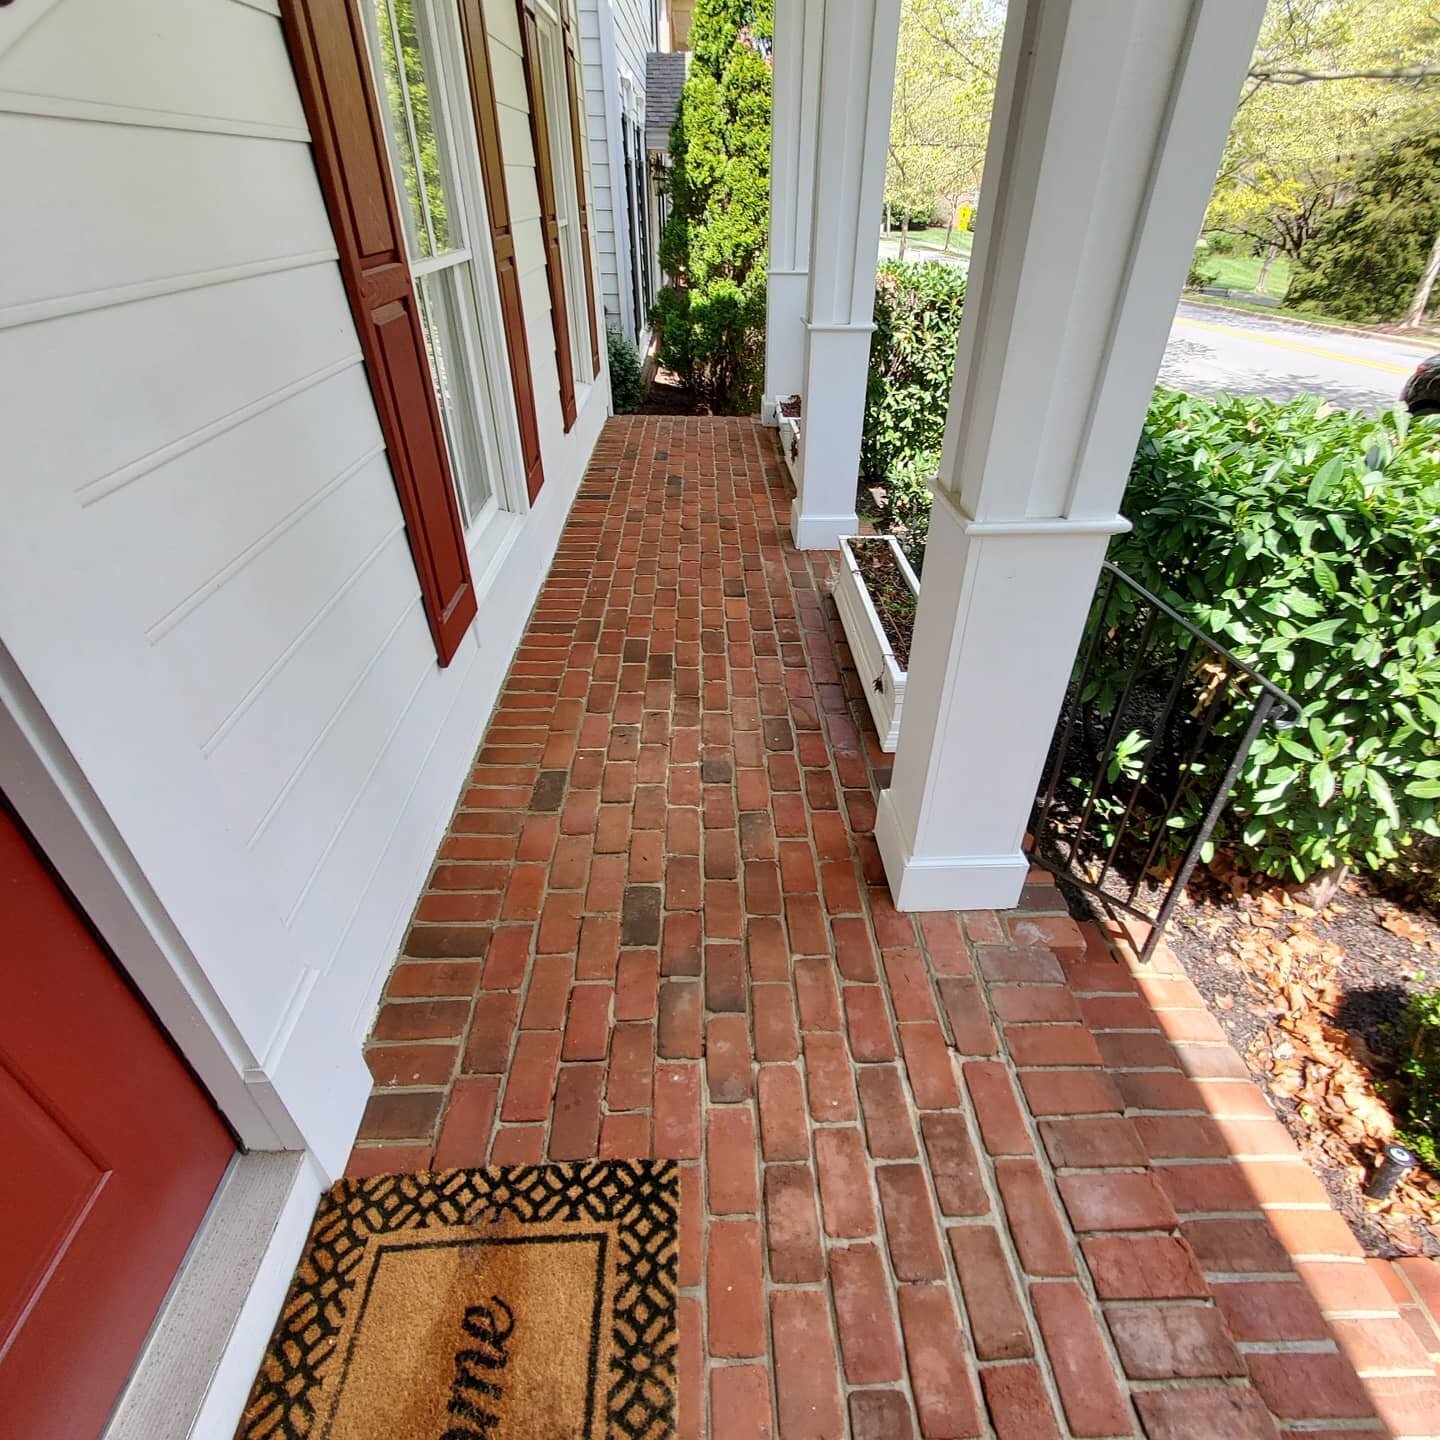 Keep your outdoor space looking beautiful and sanitized, The Deck Dudes Mildewcide, kills mold, mildew, fungal, bacterial. And viral spores.
#springcleaning
#powerwashing #softwashing #surfacecleaning